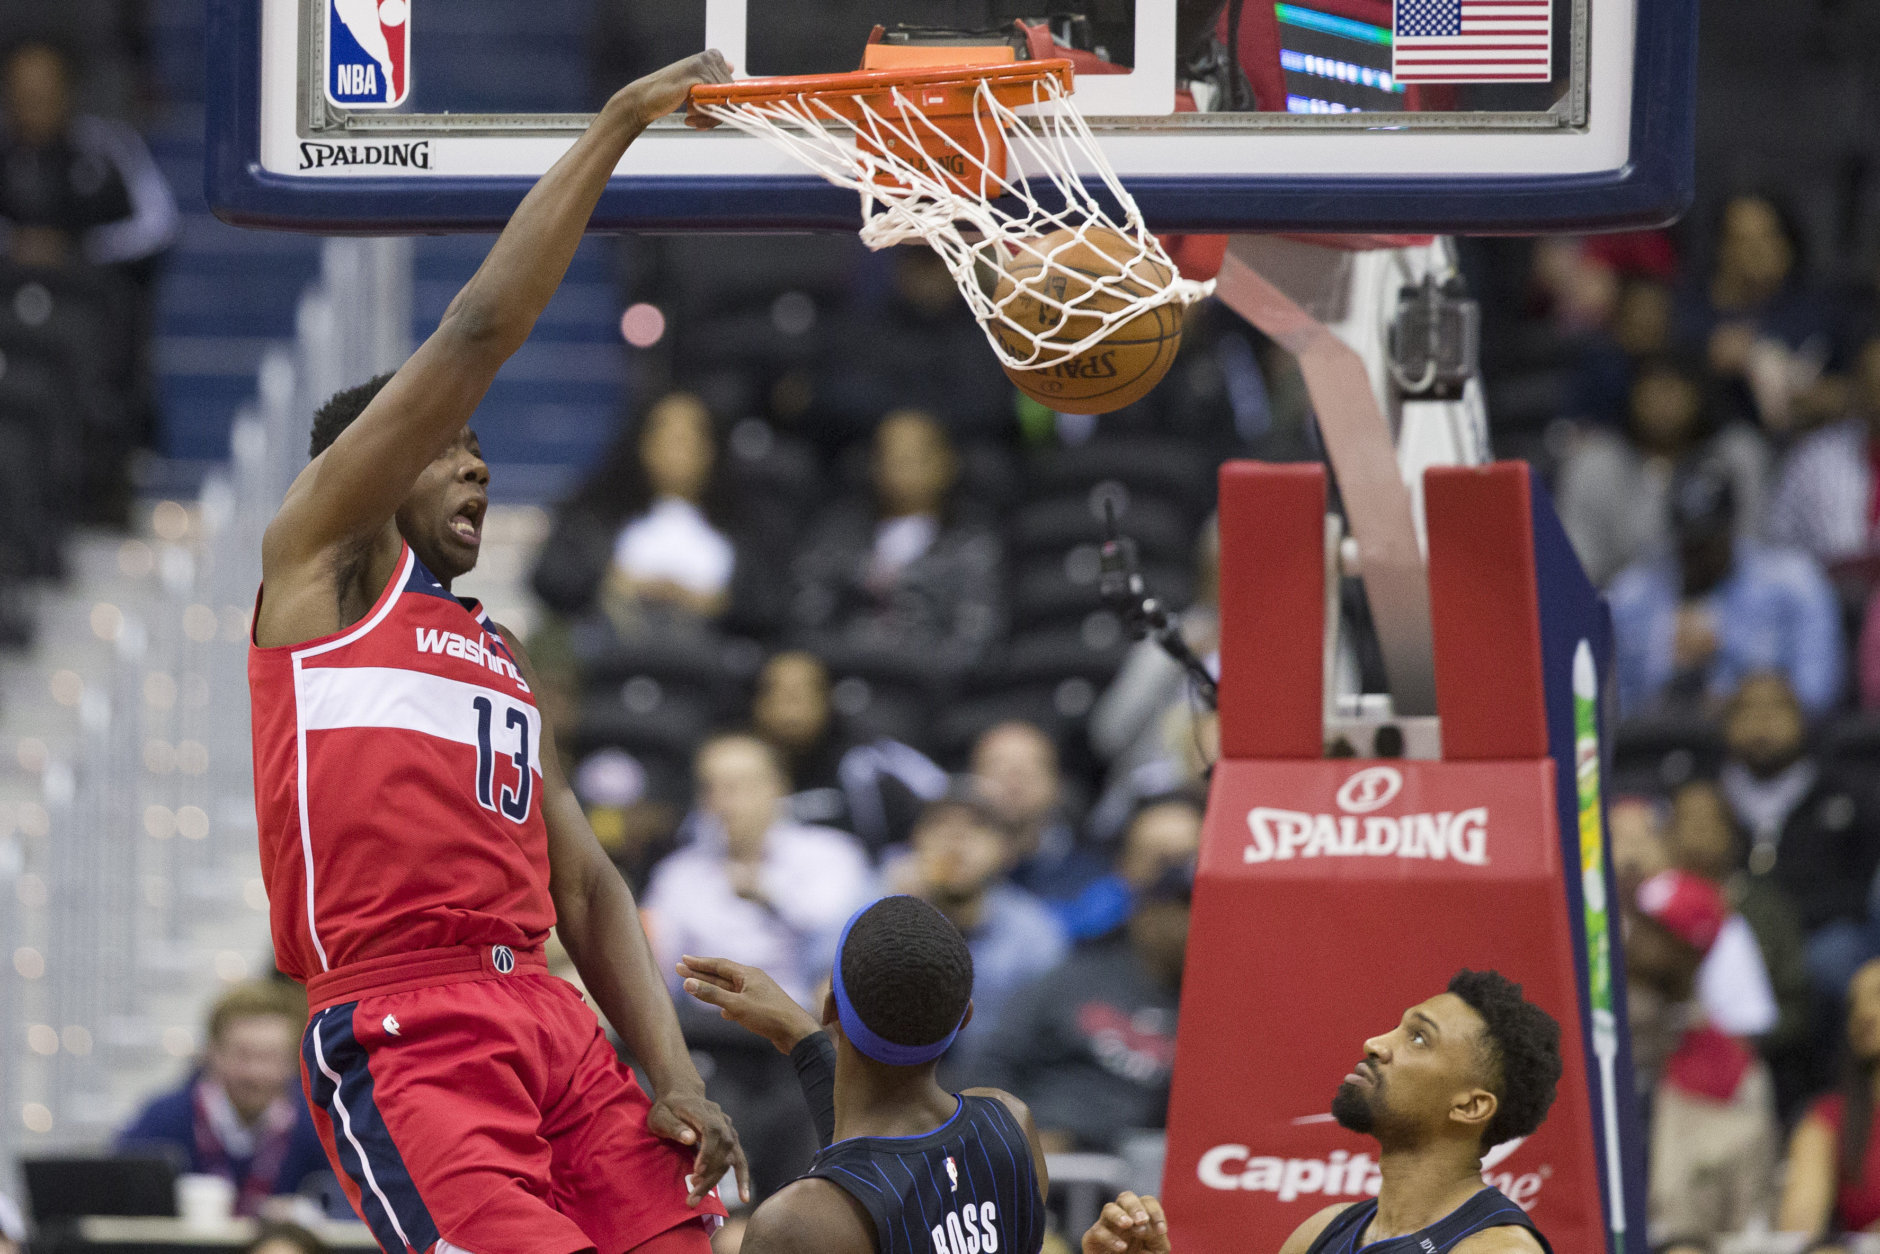 Washington Wizards center Thomas Bryant (13) dunks in front of Orlando Magic guard Terrence Ross, left, and center Khem Birch during the first half of an NBA basketball game Wednesday, March 13, 2019, in Washington. (AP Photo/Alex Brandon)